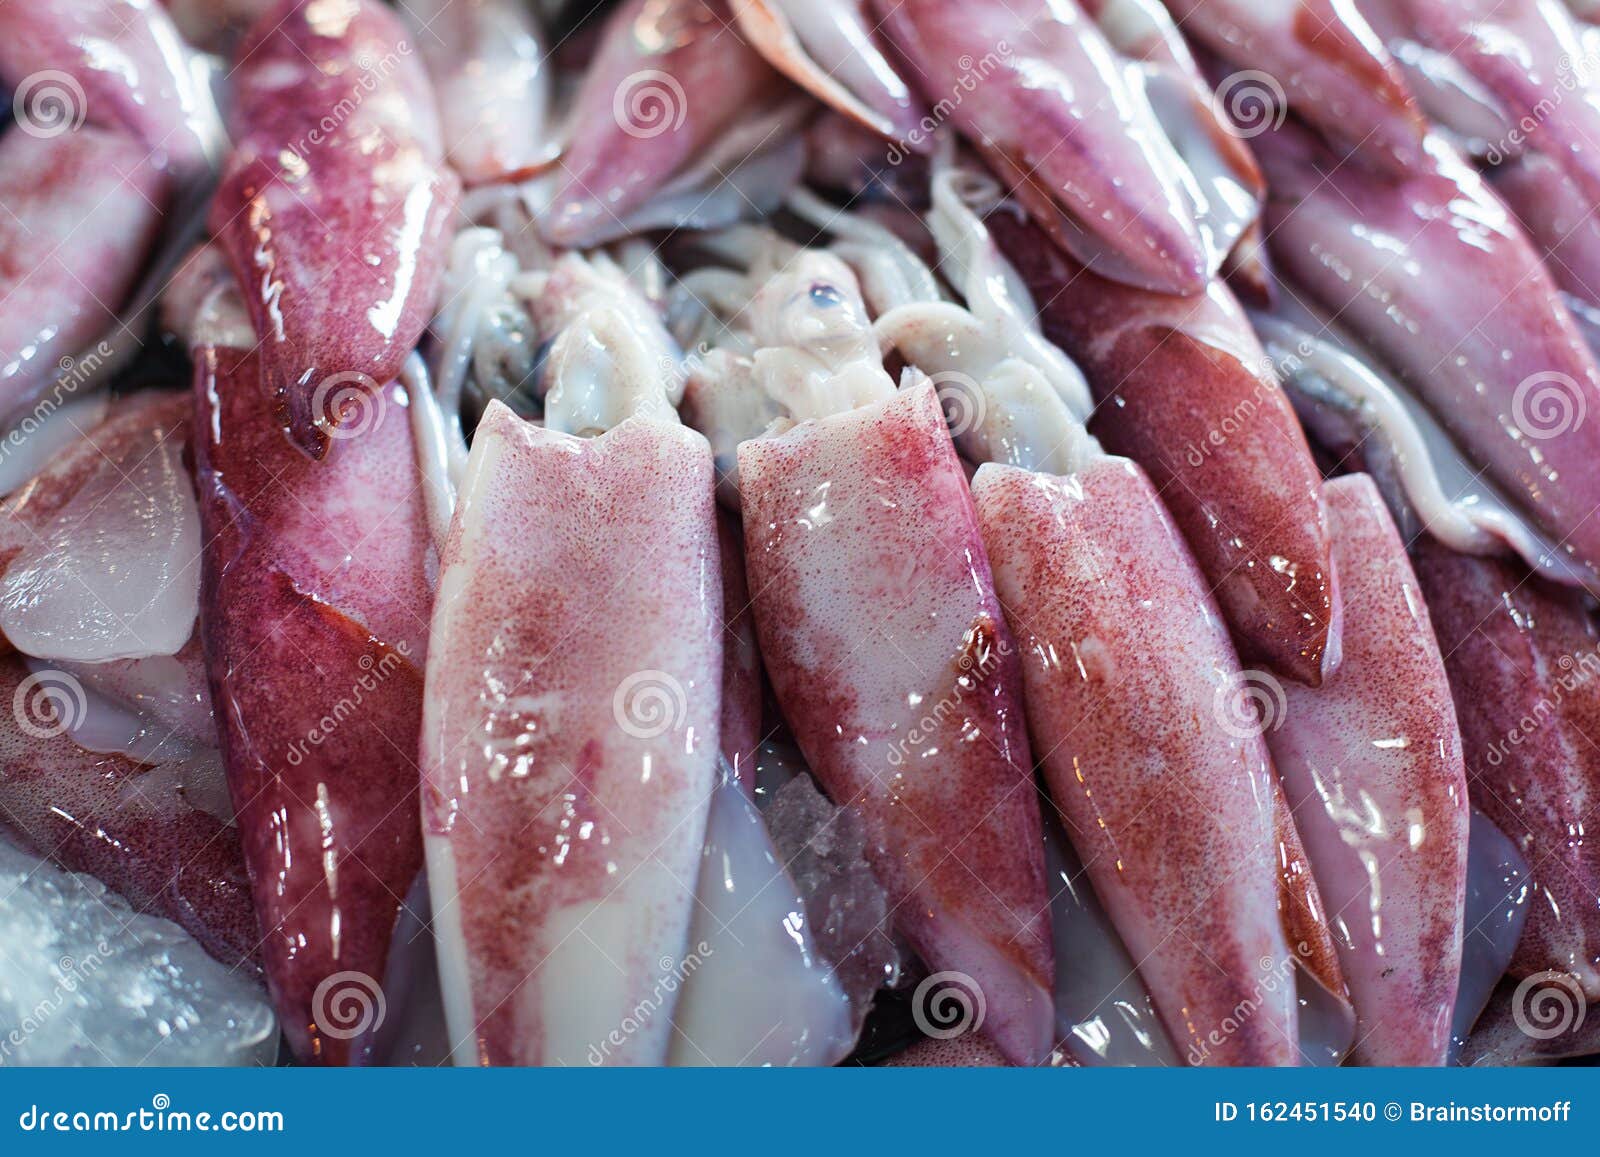 Many Fresh Raw Calamari Close Up, Heap of Red and White Calamary on Seafood Market, Squids with Ice Closeup, Squid Background Stock Photo - Image of cook: 162451540